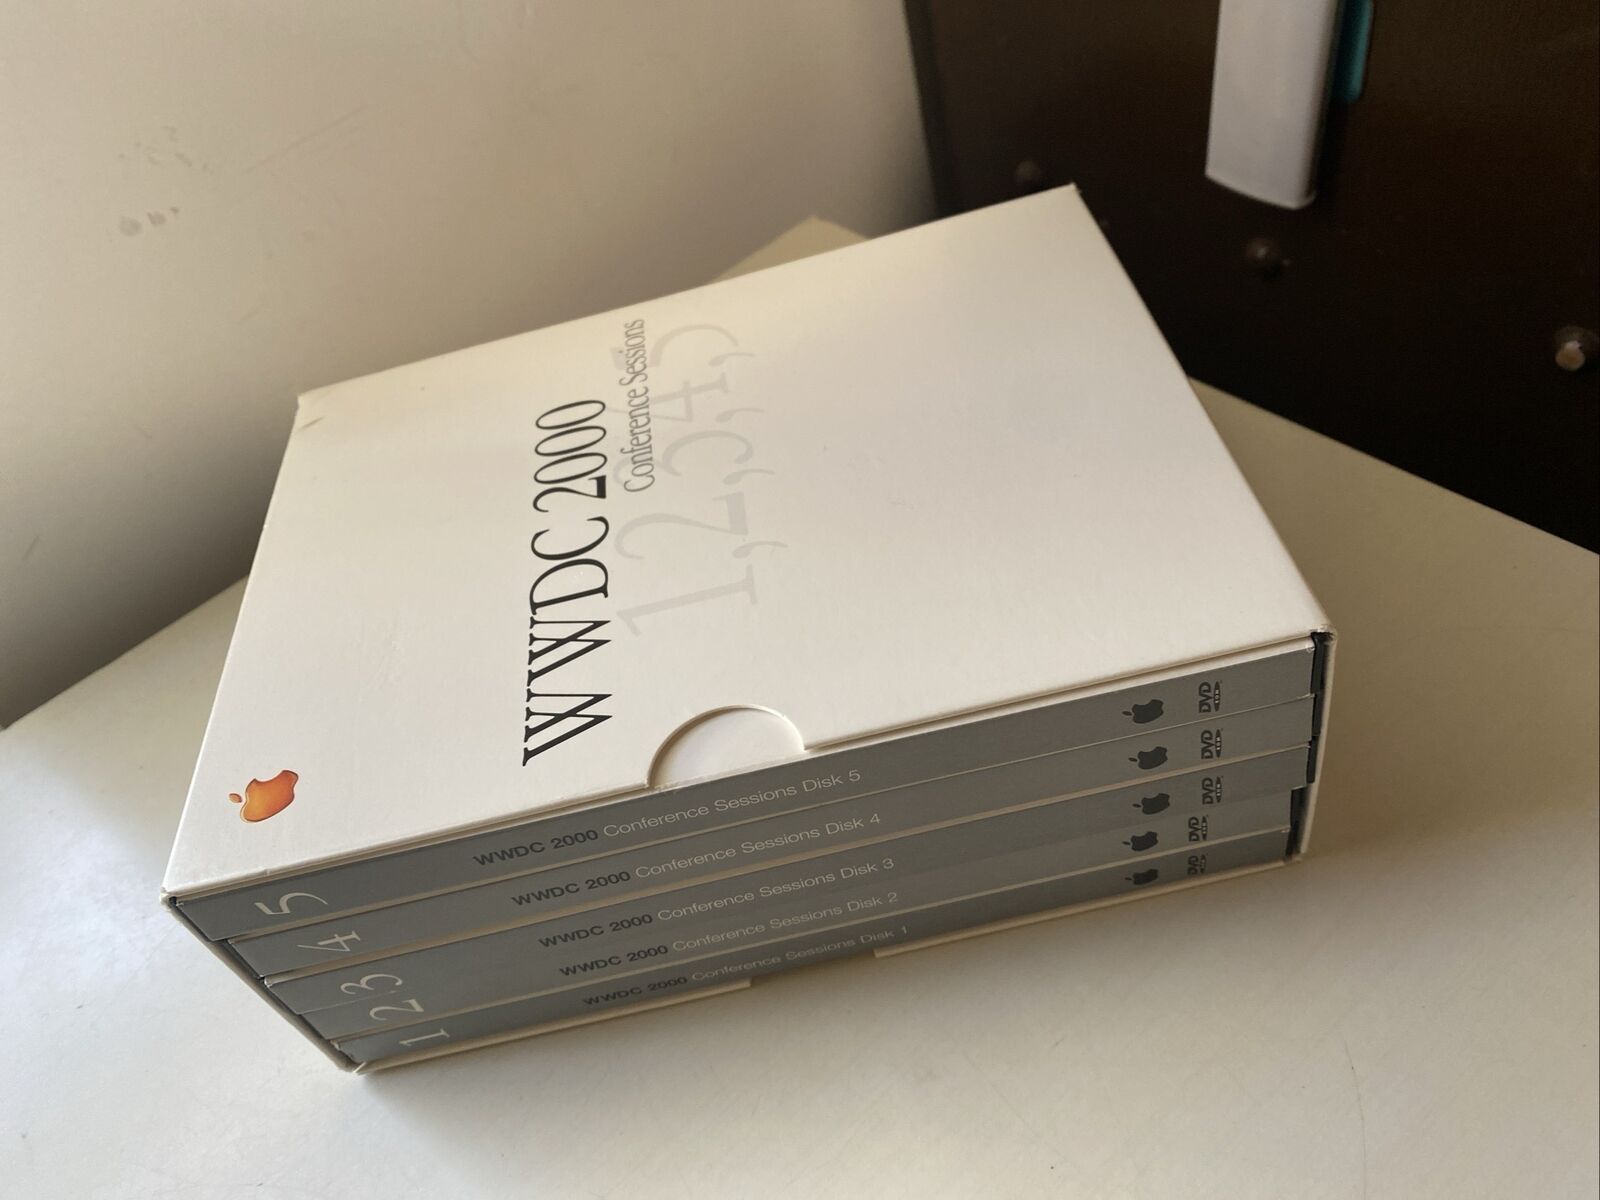 RARE APPLE WWDC 2000 Worldwide Developers’ Conference Sessions DVD Set Complete